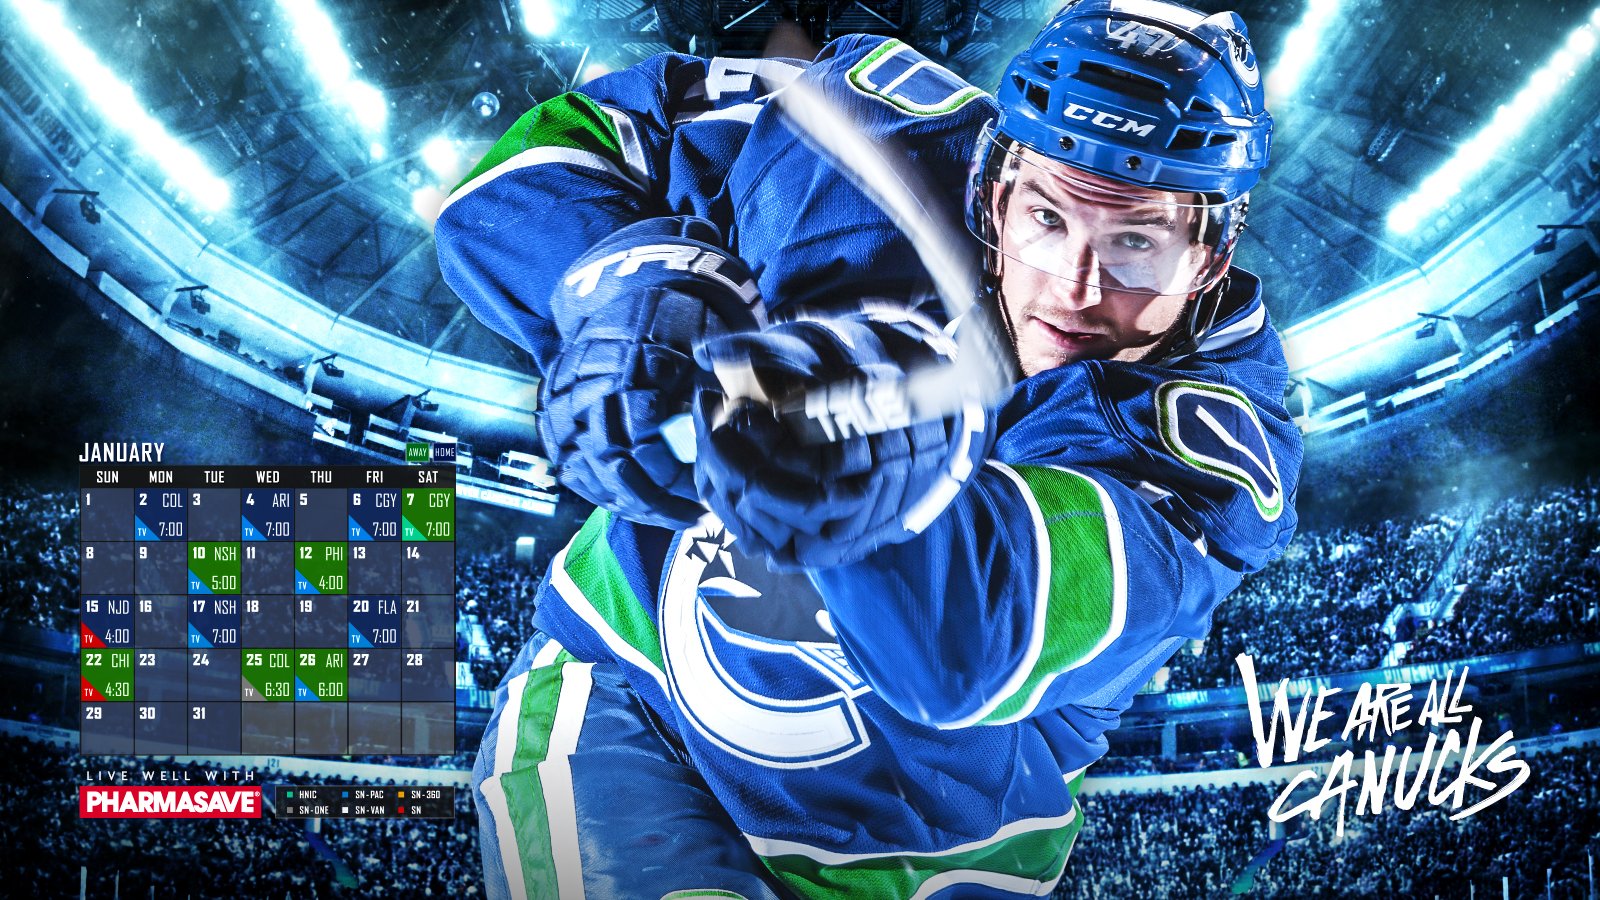 The season is finally here! Here is your October Canucks schedule wallpaper  : r/canucks